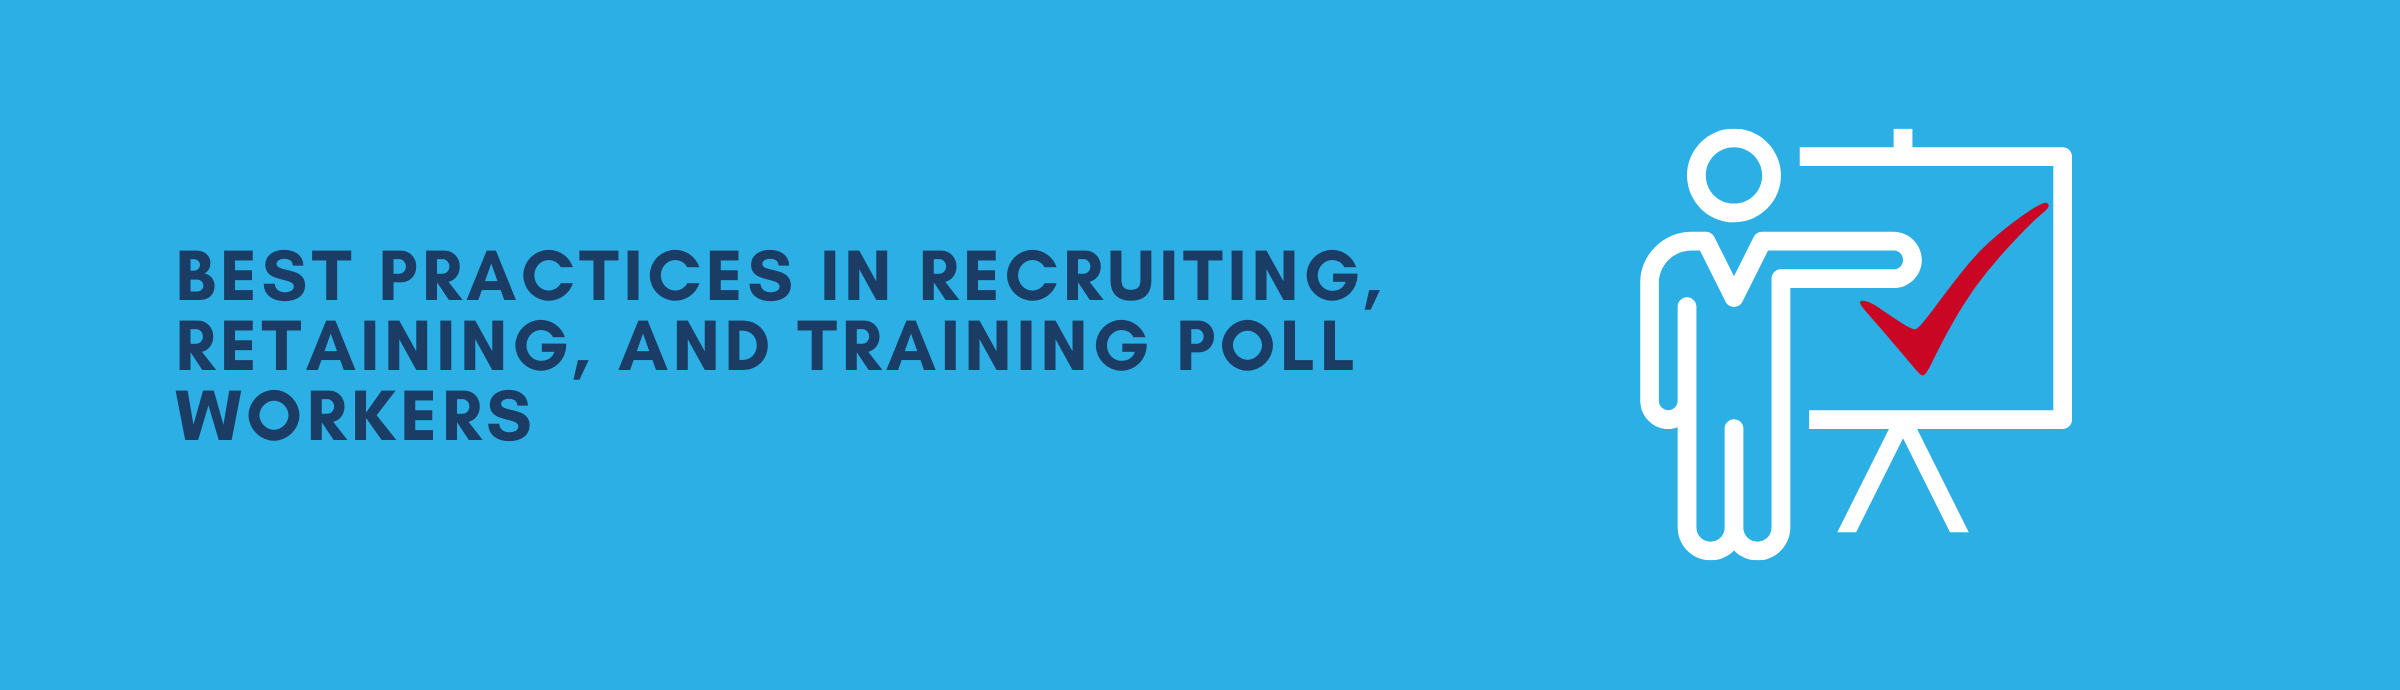 The text to the left reads "Best Practices in Recruiting, Retaining, and Training Poll Workers." The graphic on the right shows an outline of a person pointing to the right to a display board with a red checkmark on it. 